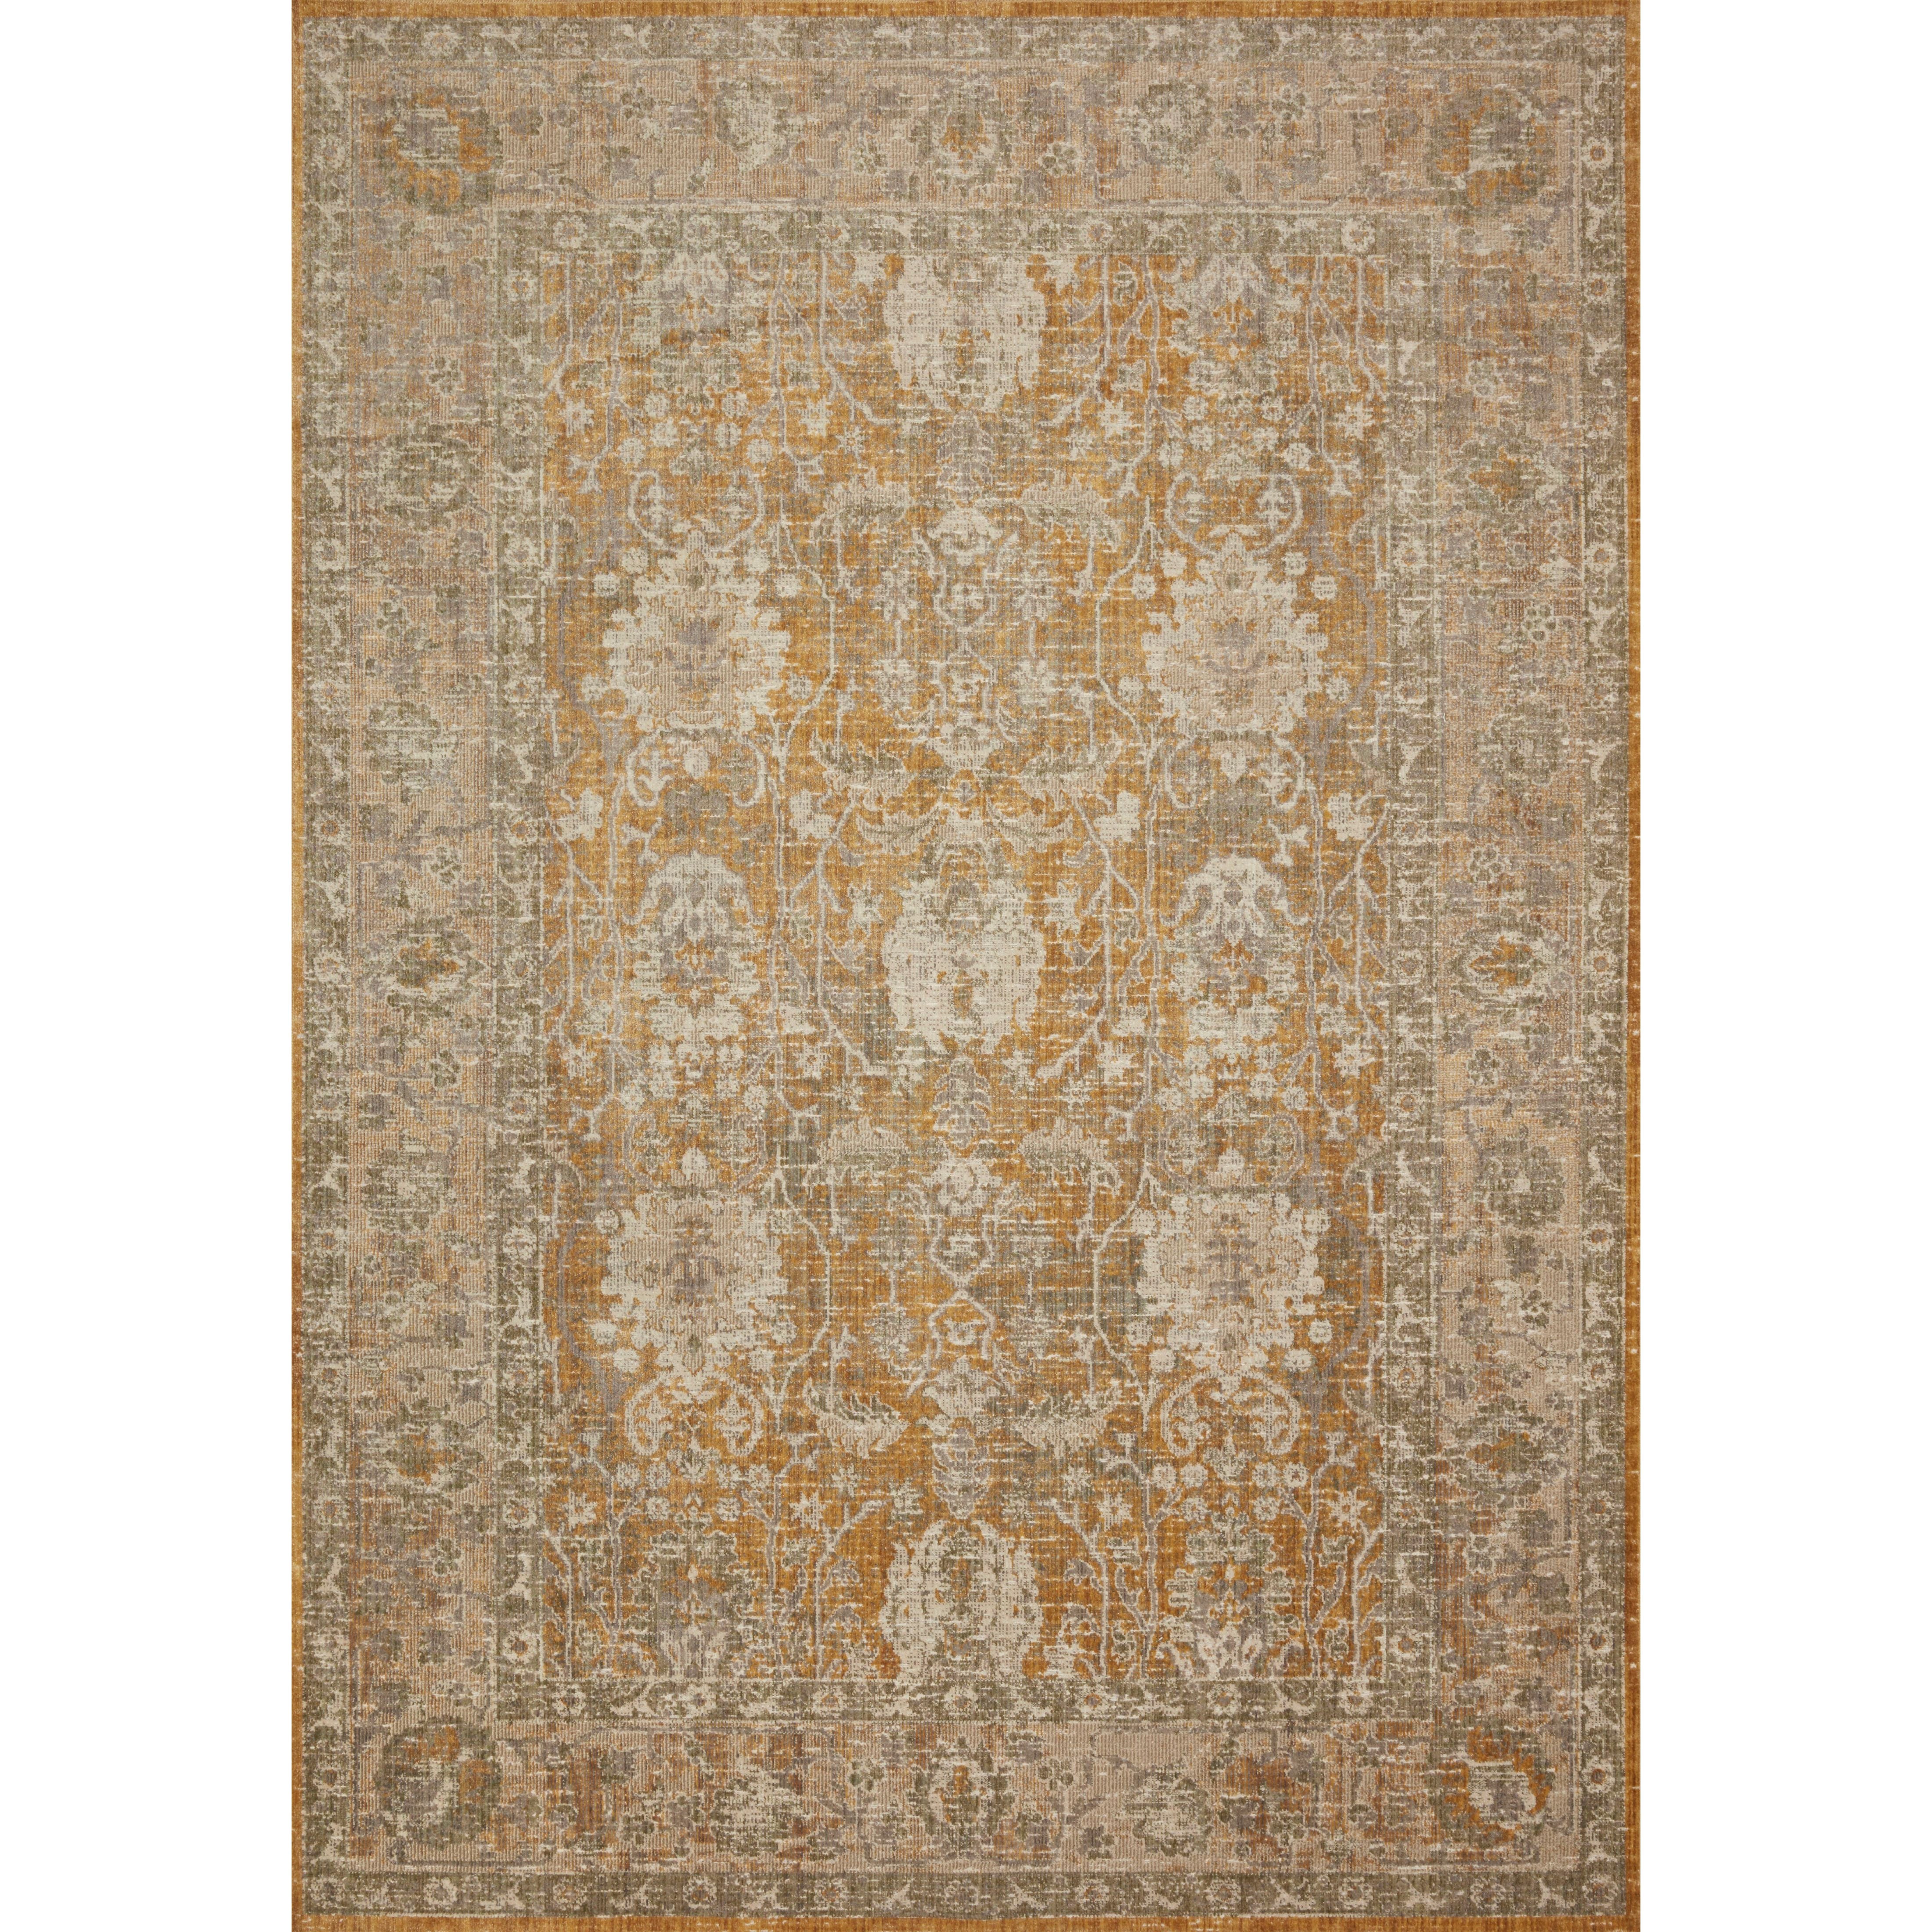 Durable, low pile, and soft underfoot, this rug is inspired by classic vintage and antique rugs. The Rosemarie Chris Loves Julia Gold / Sand ROE-01 rug from Loloi features a beautiful vintage pattern and patina. The rug is easy to clean, never sheds, and perfect for living rooms, dining rooms, hallways, and kitchens!